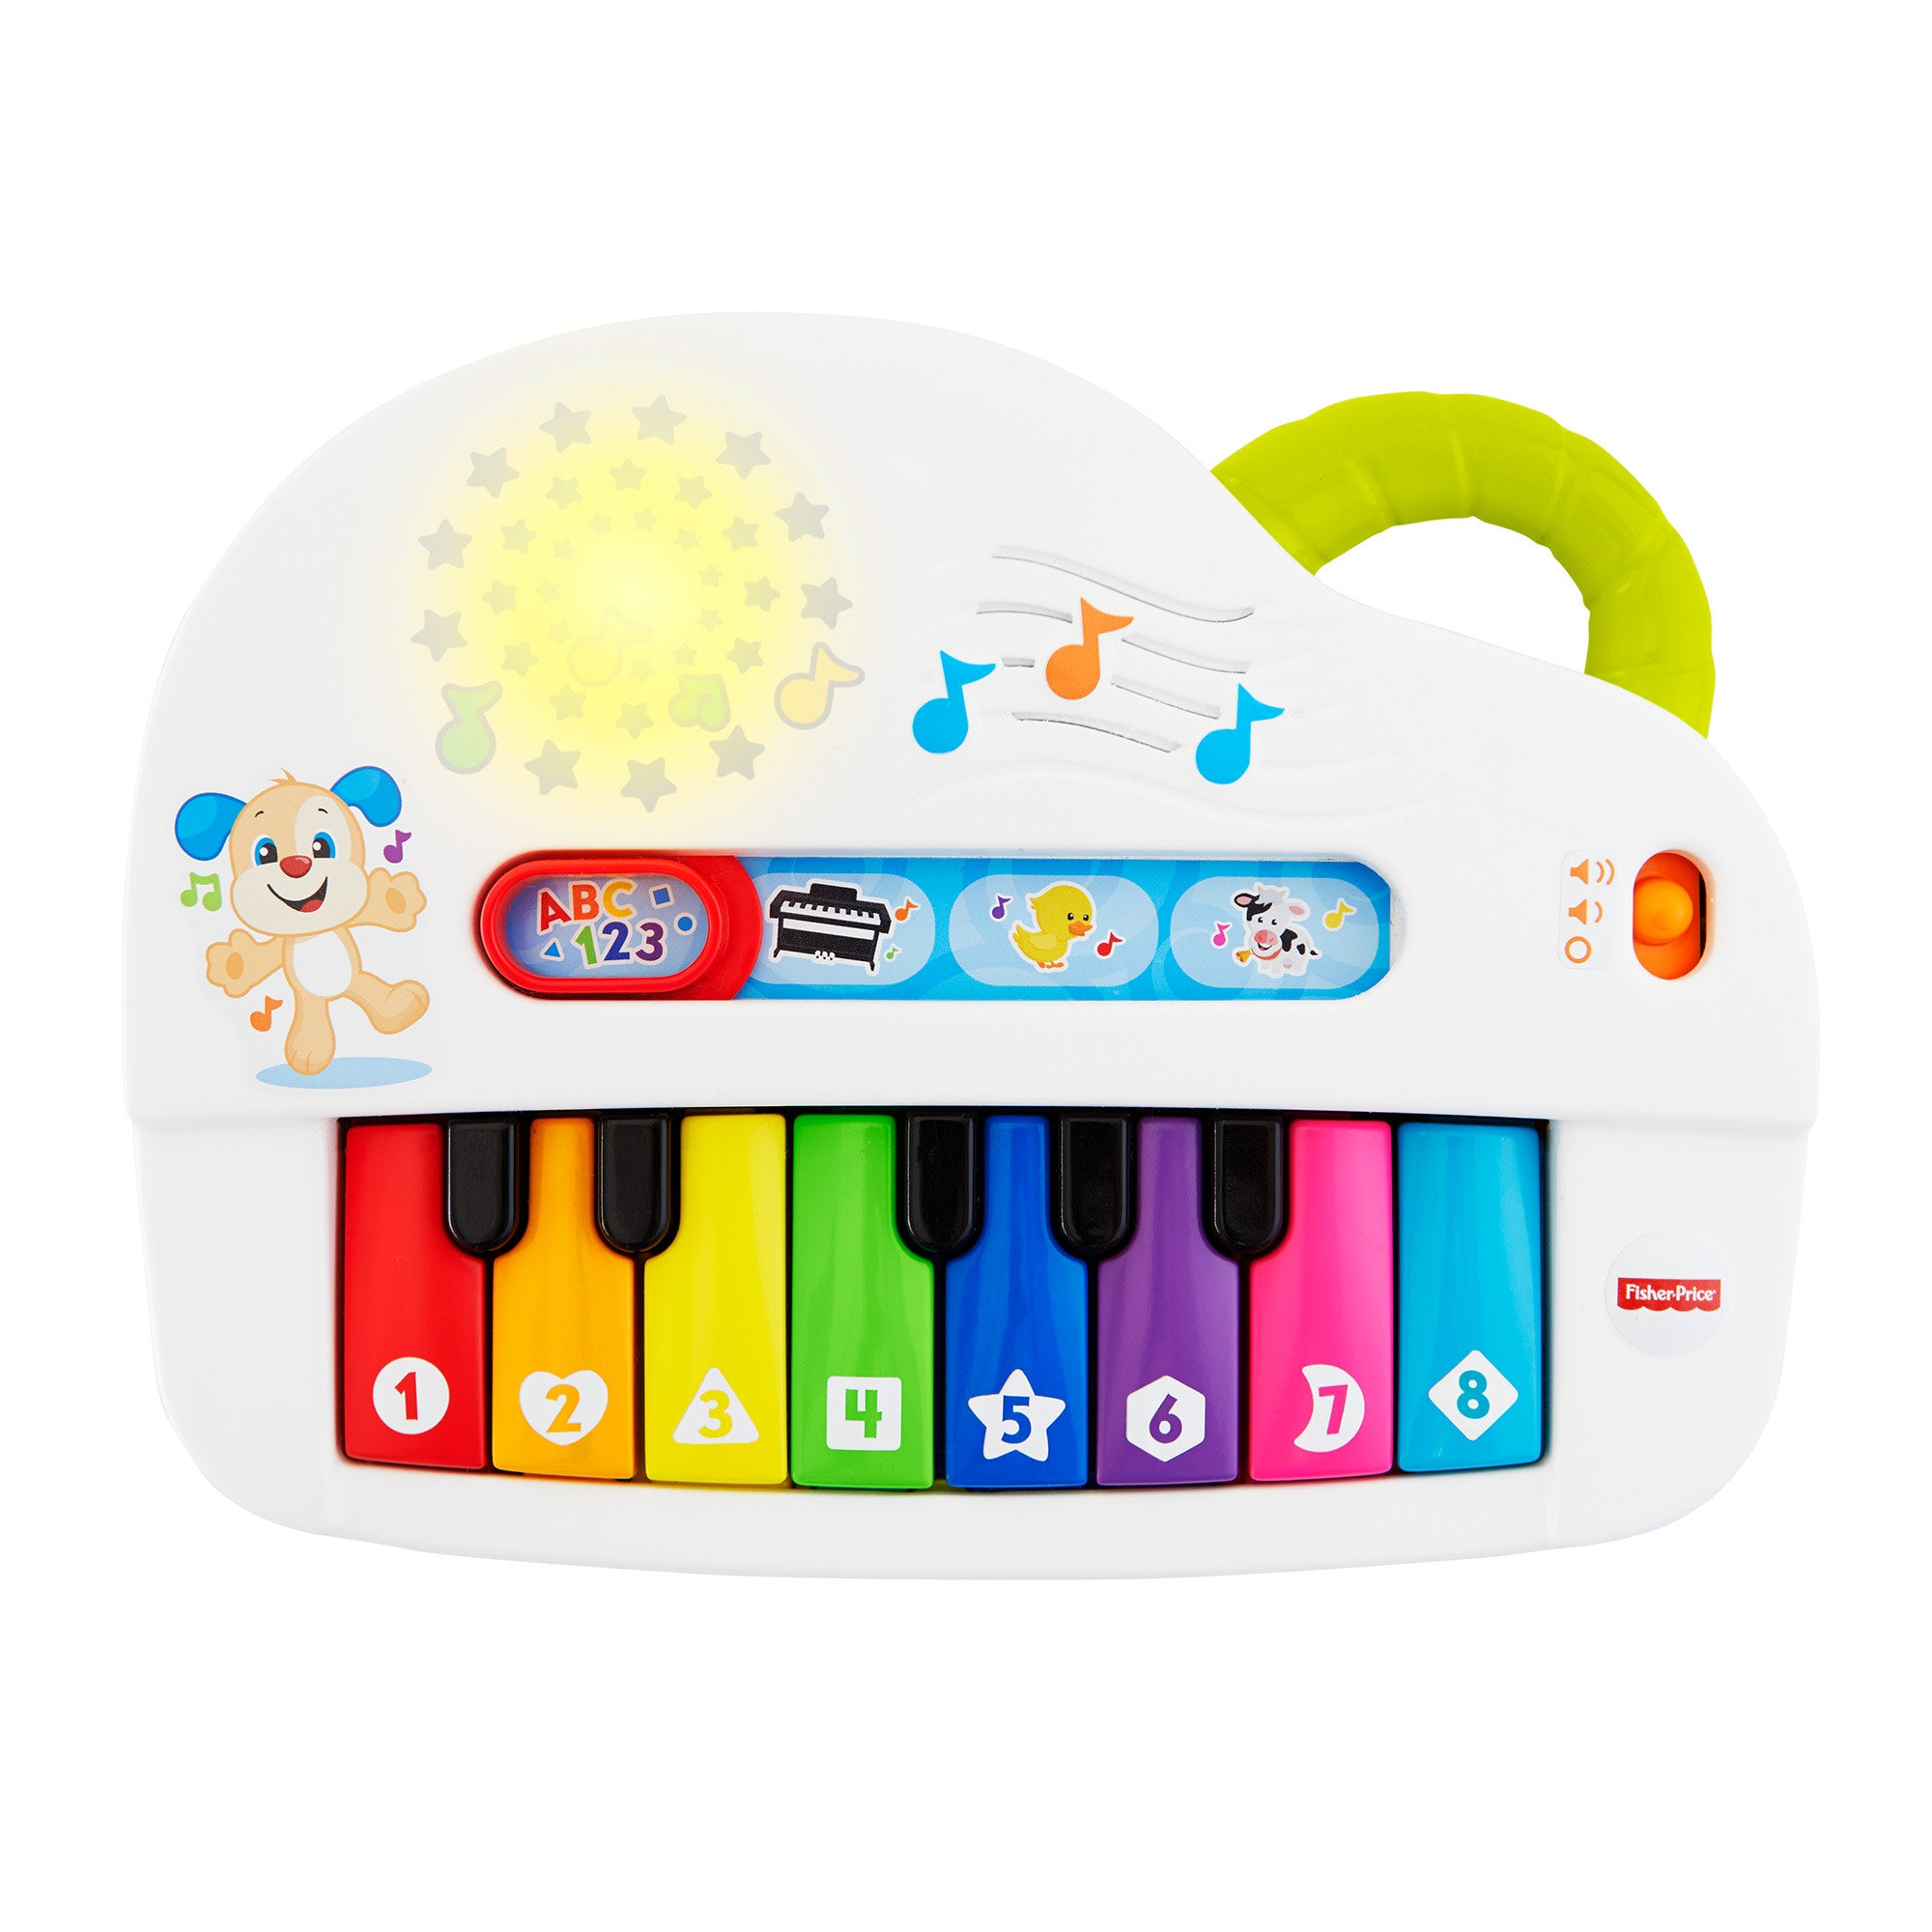 Fisher-Price Dance & Groove Rockit Baby Electronic Learning Toy with Music  and Lights 